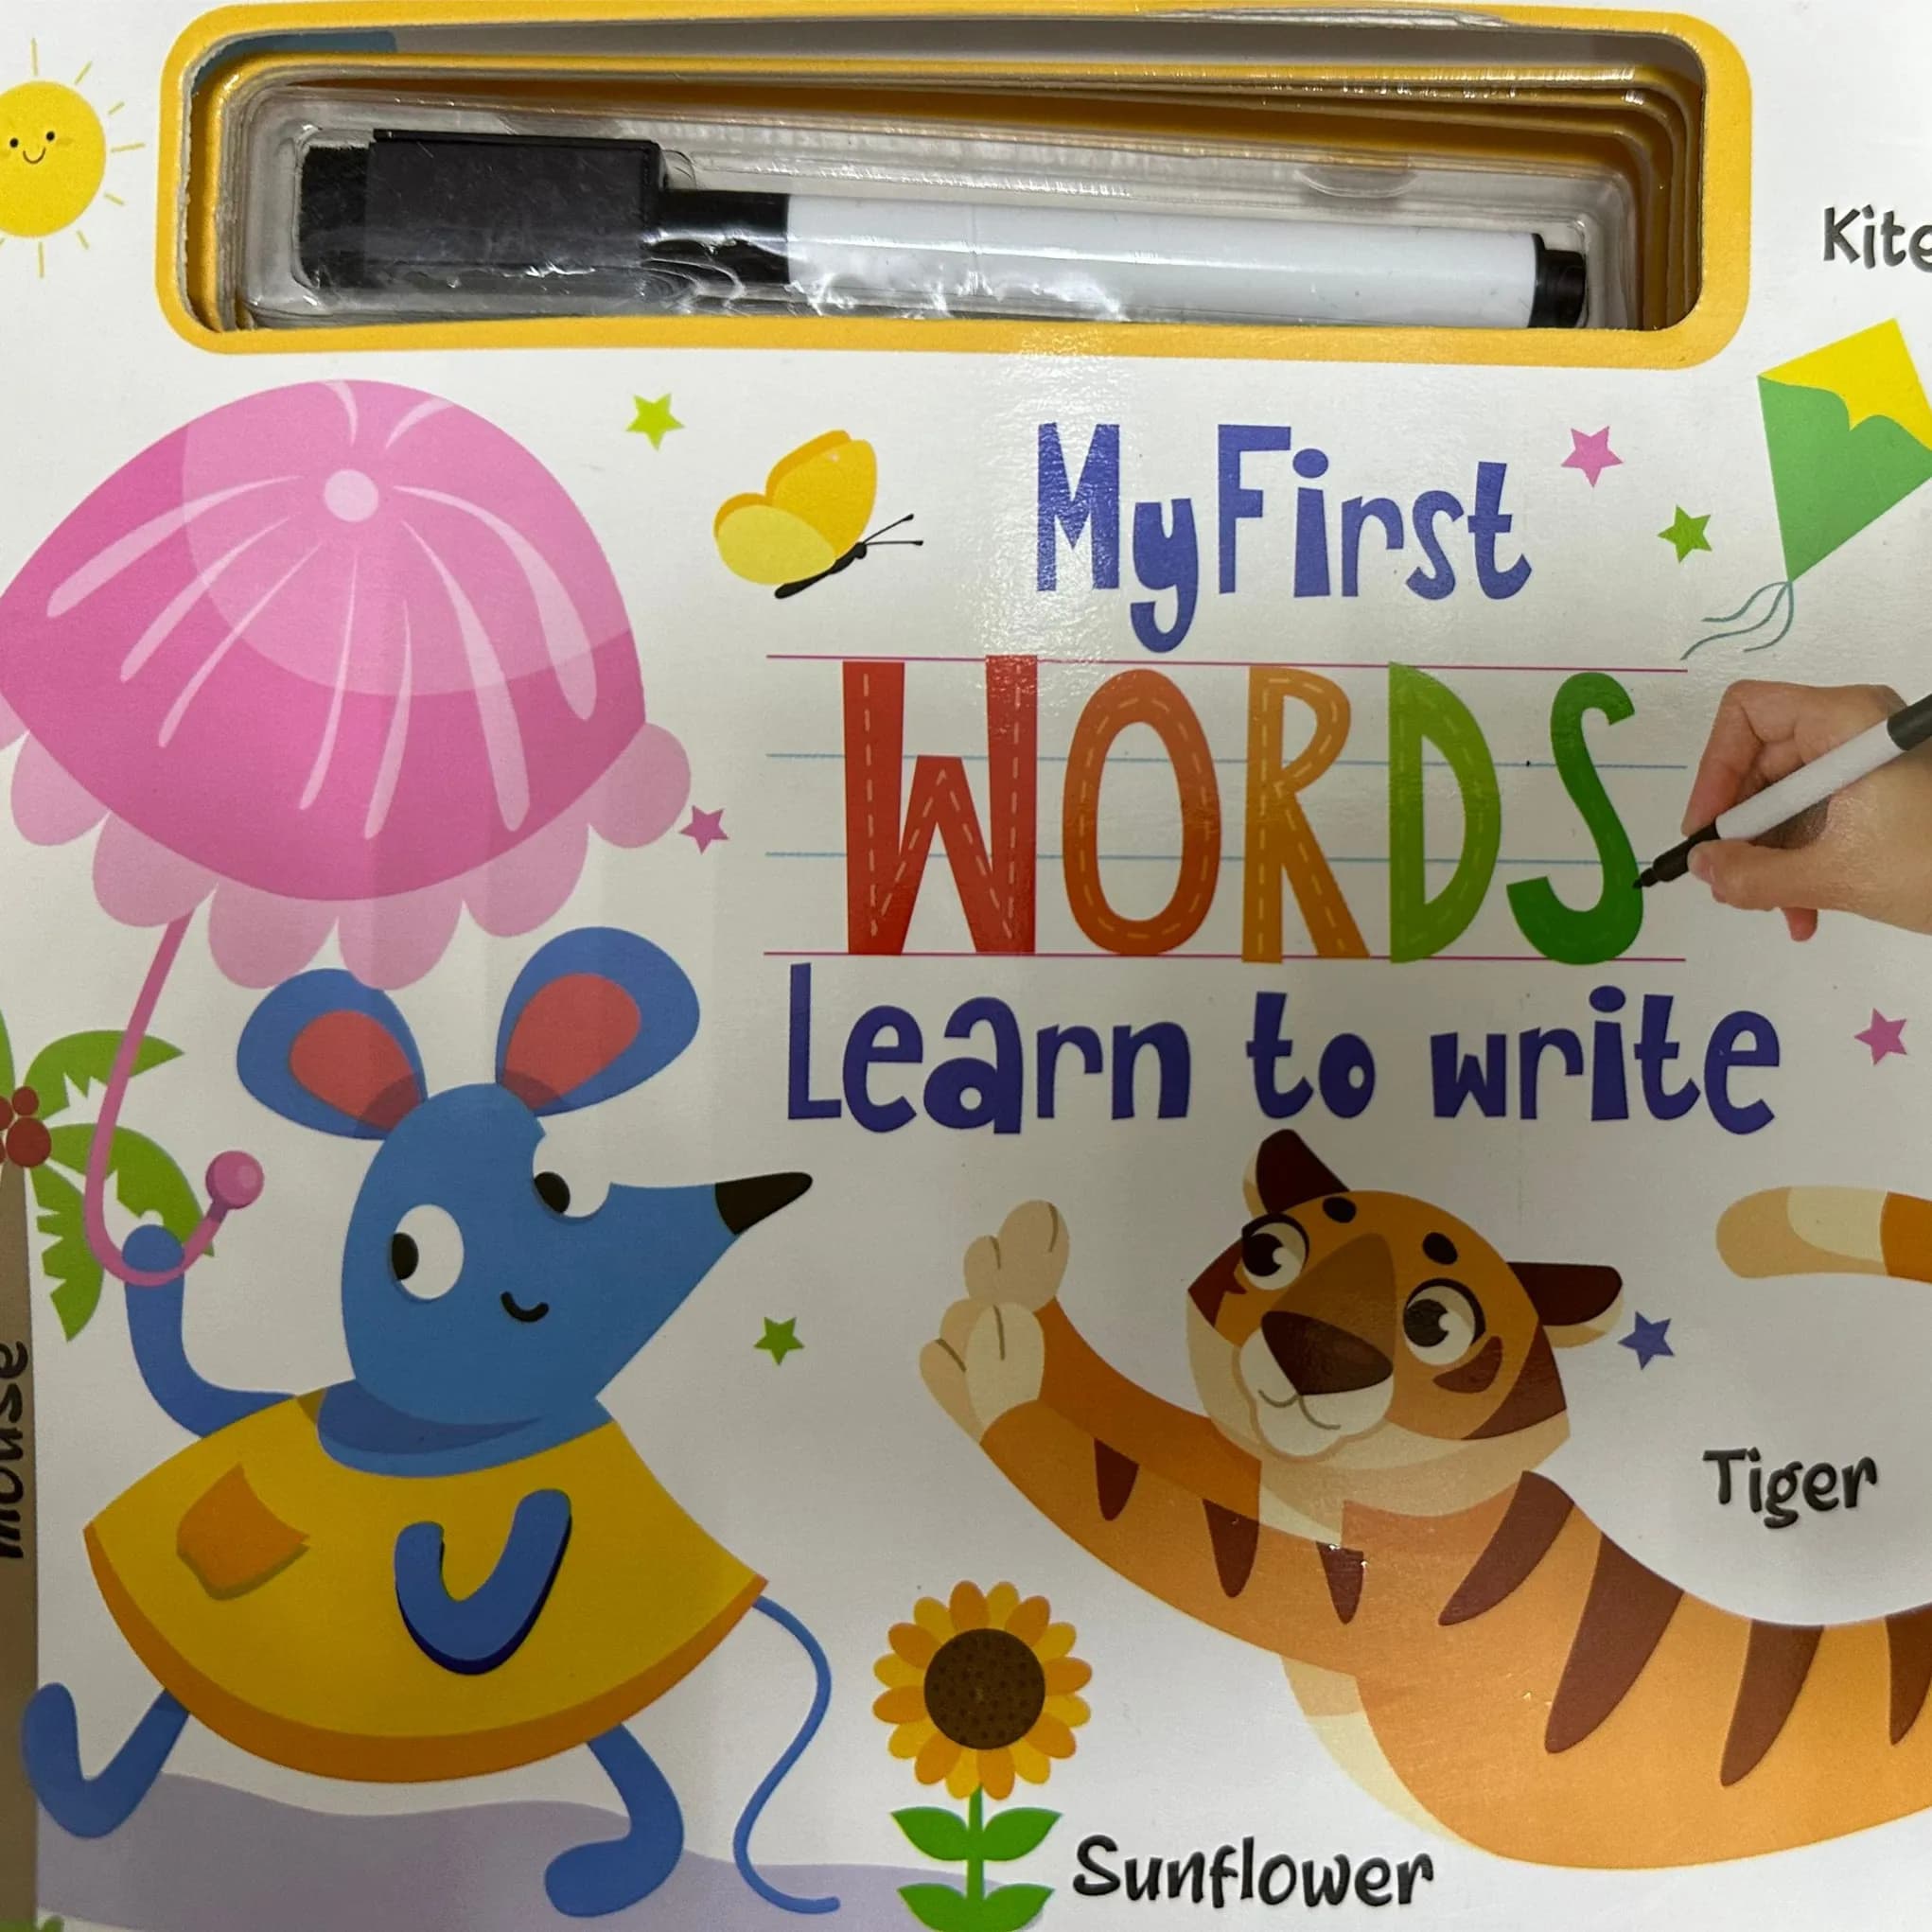 MY FIRST WORDS - LEARN TO WRITE